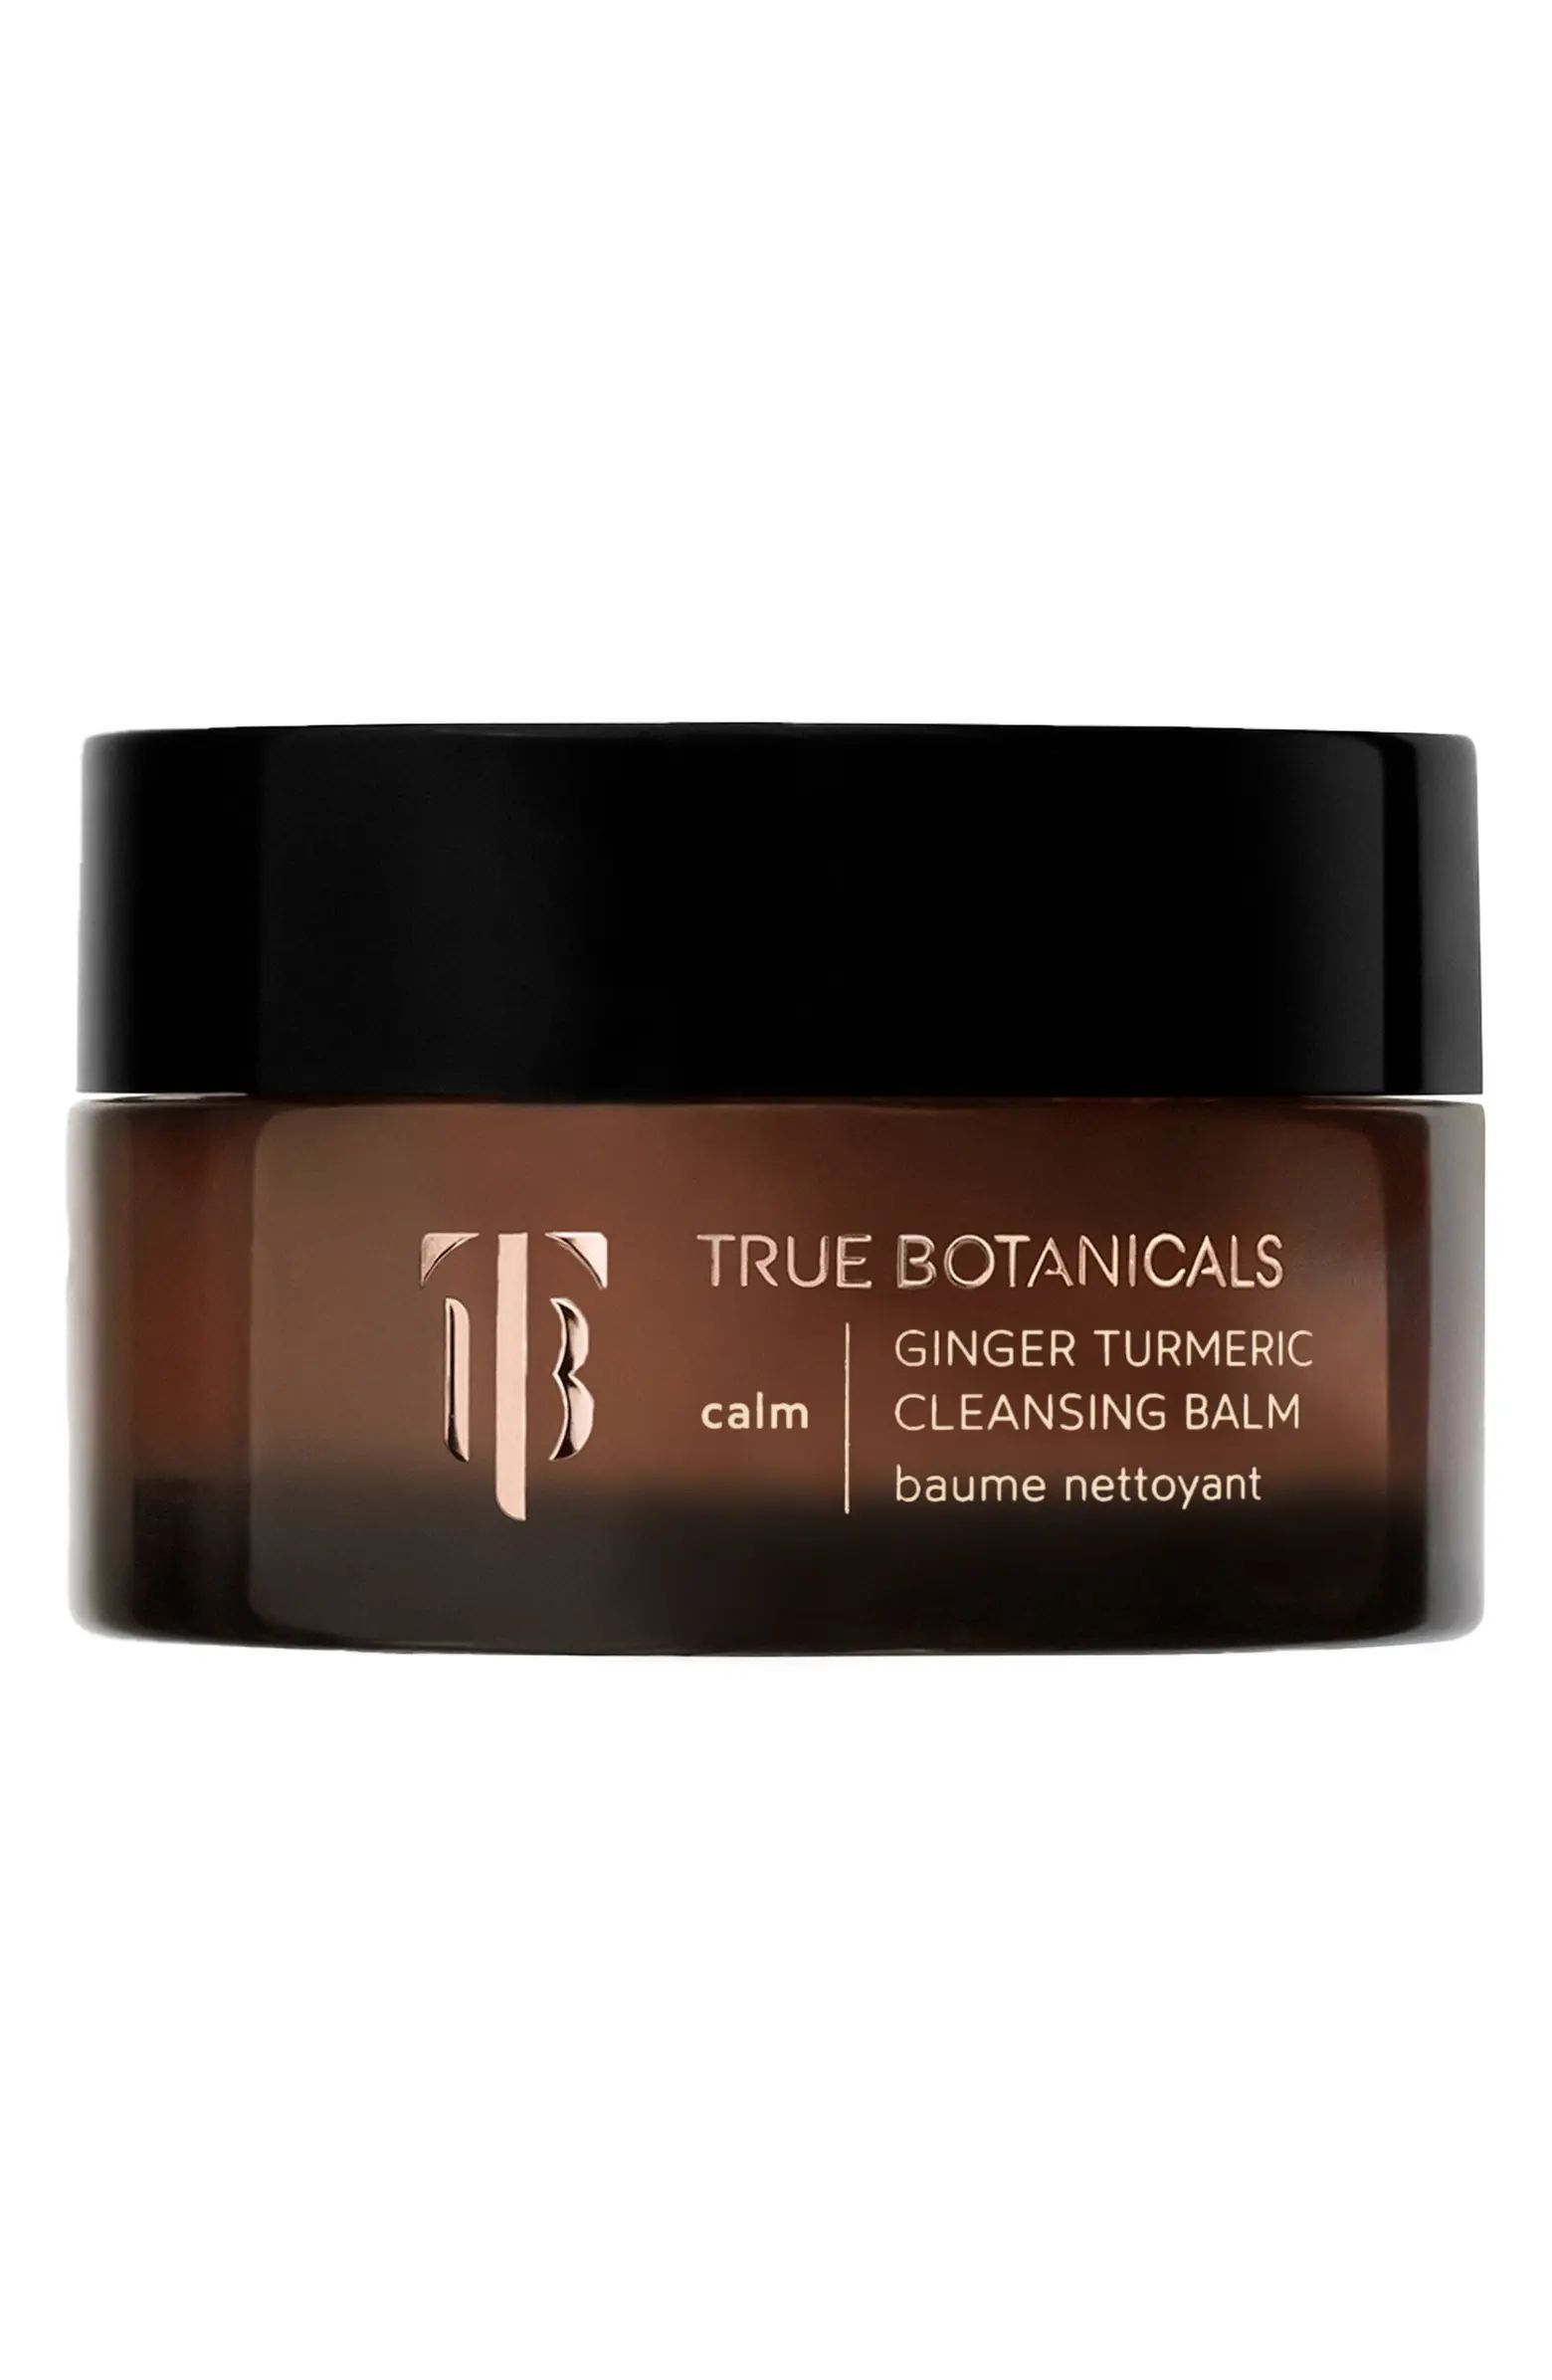 Calm Ginger Turmeric Cleansing Balm | Nordstrom